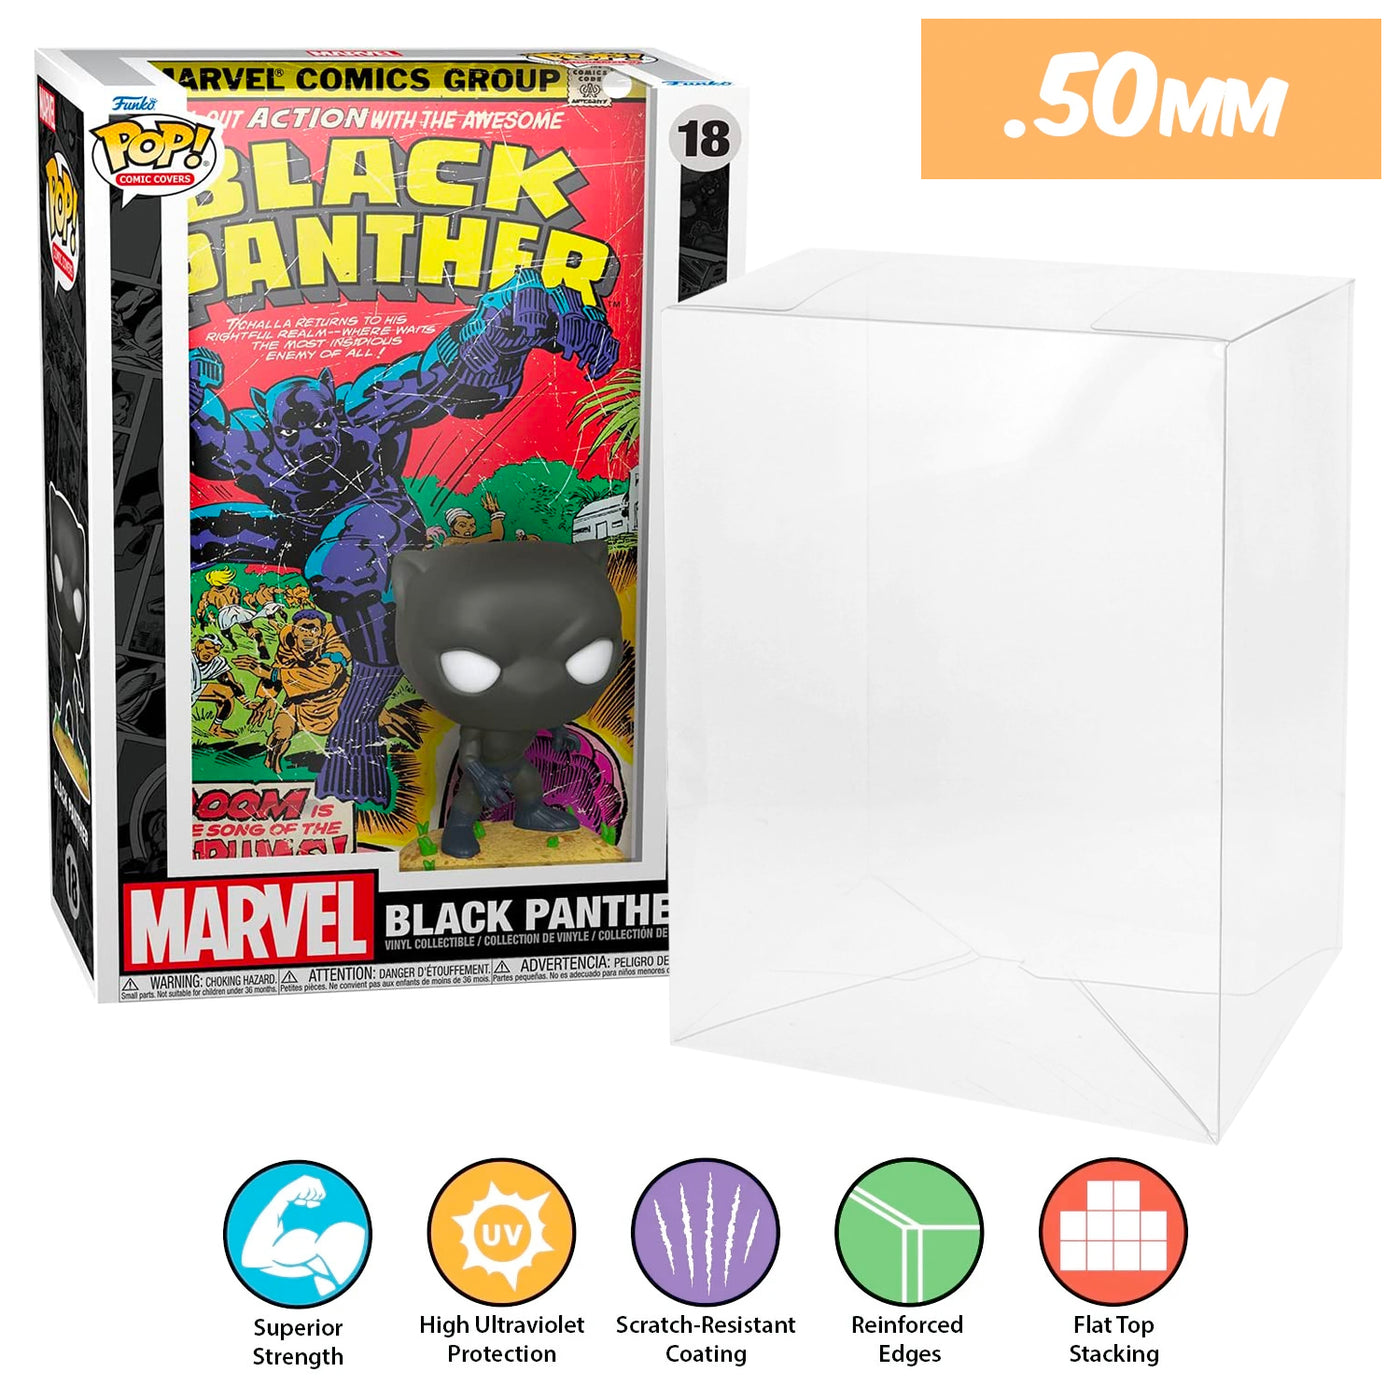 marvel black panther pop comic covers best funko pop protectors thick strong uv scratch flat top stack vinyl display geek plastic shield vaulted eco armor fits collect protect display case kollector protector